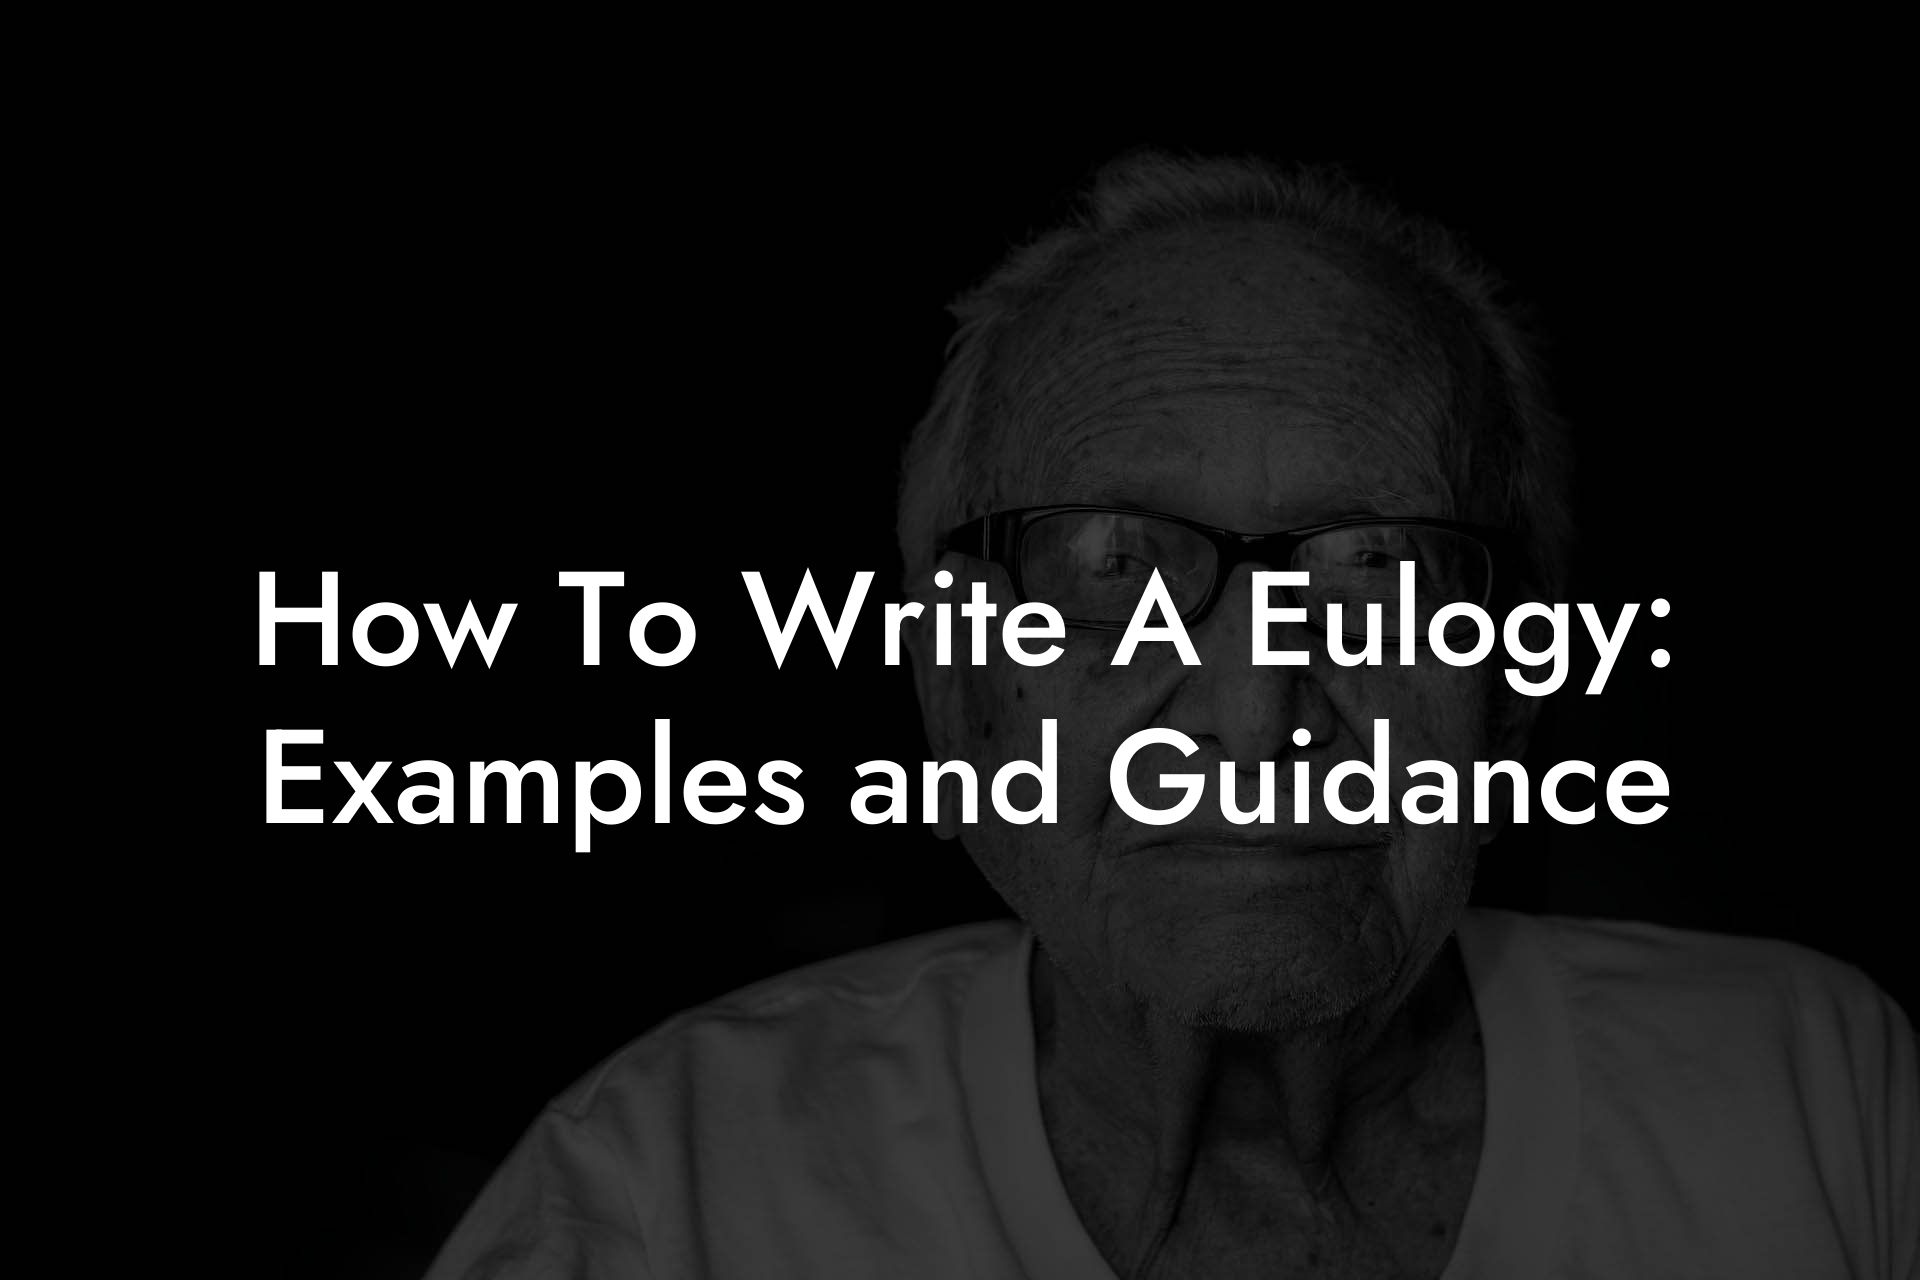 How To Write A Eulogy: Examples and Guidance